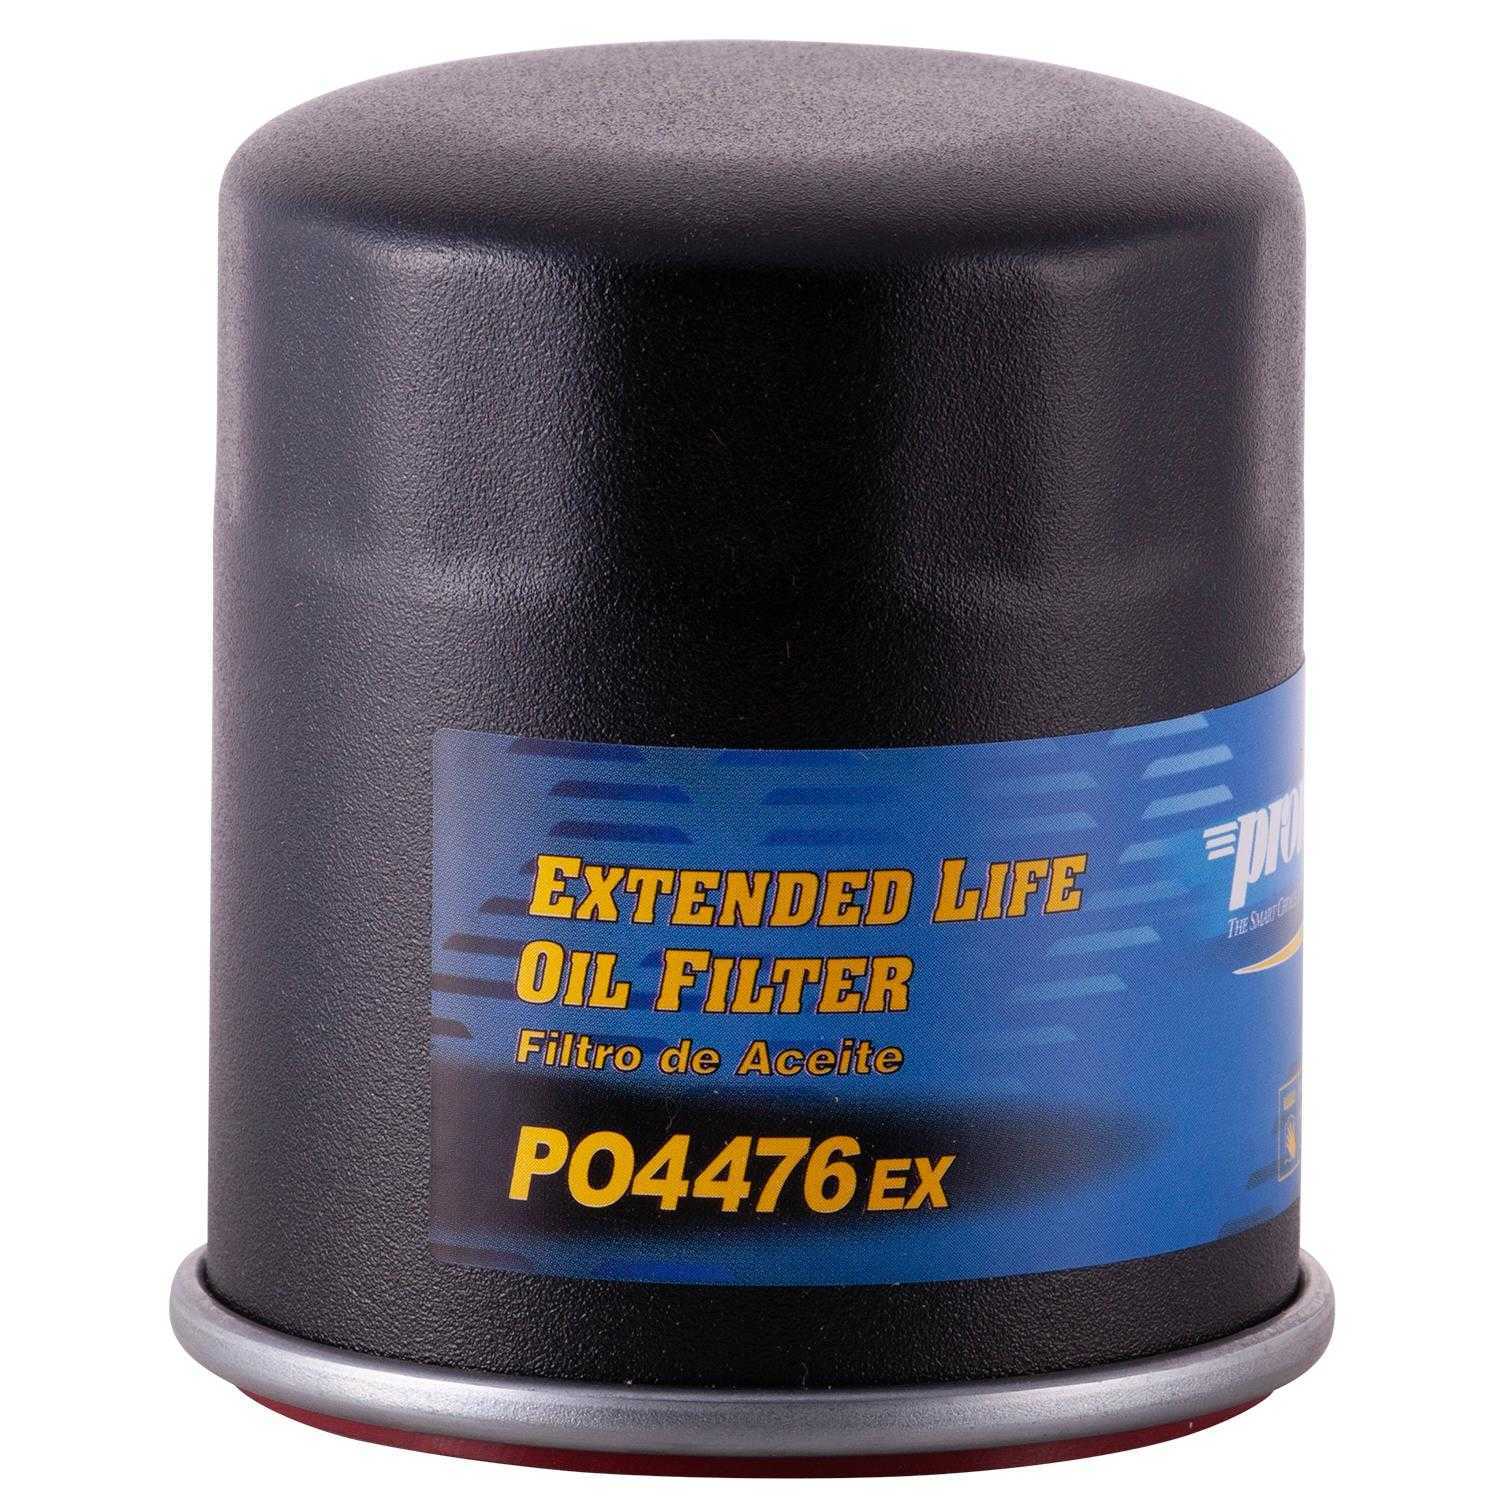 PRONTO/ID USA - Extended Life Oil Filter - PNP PO4476EX